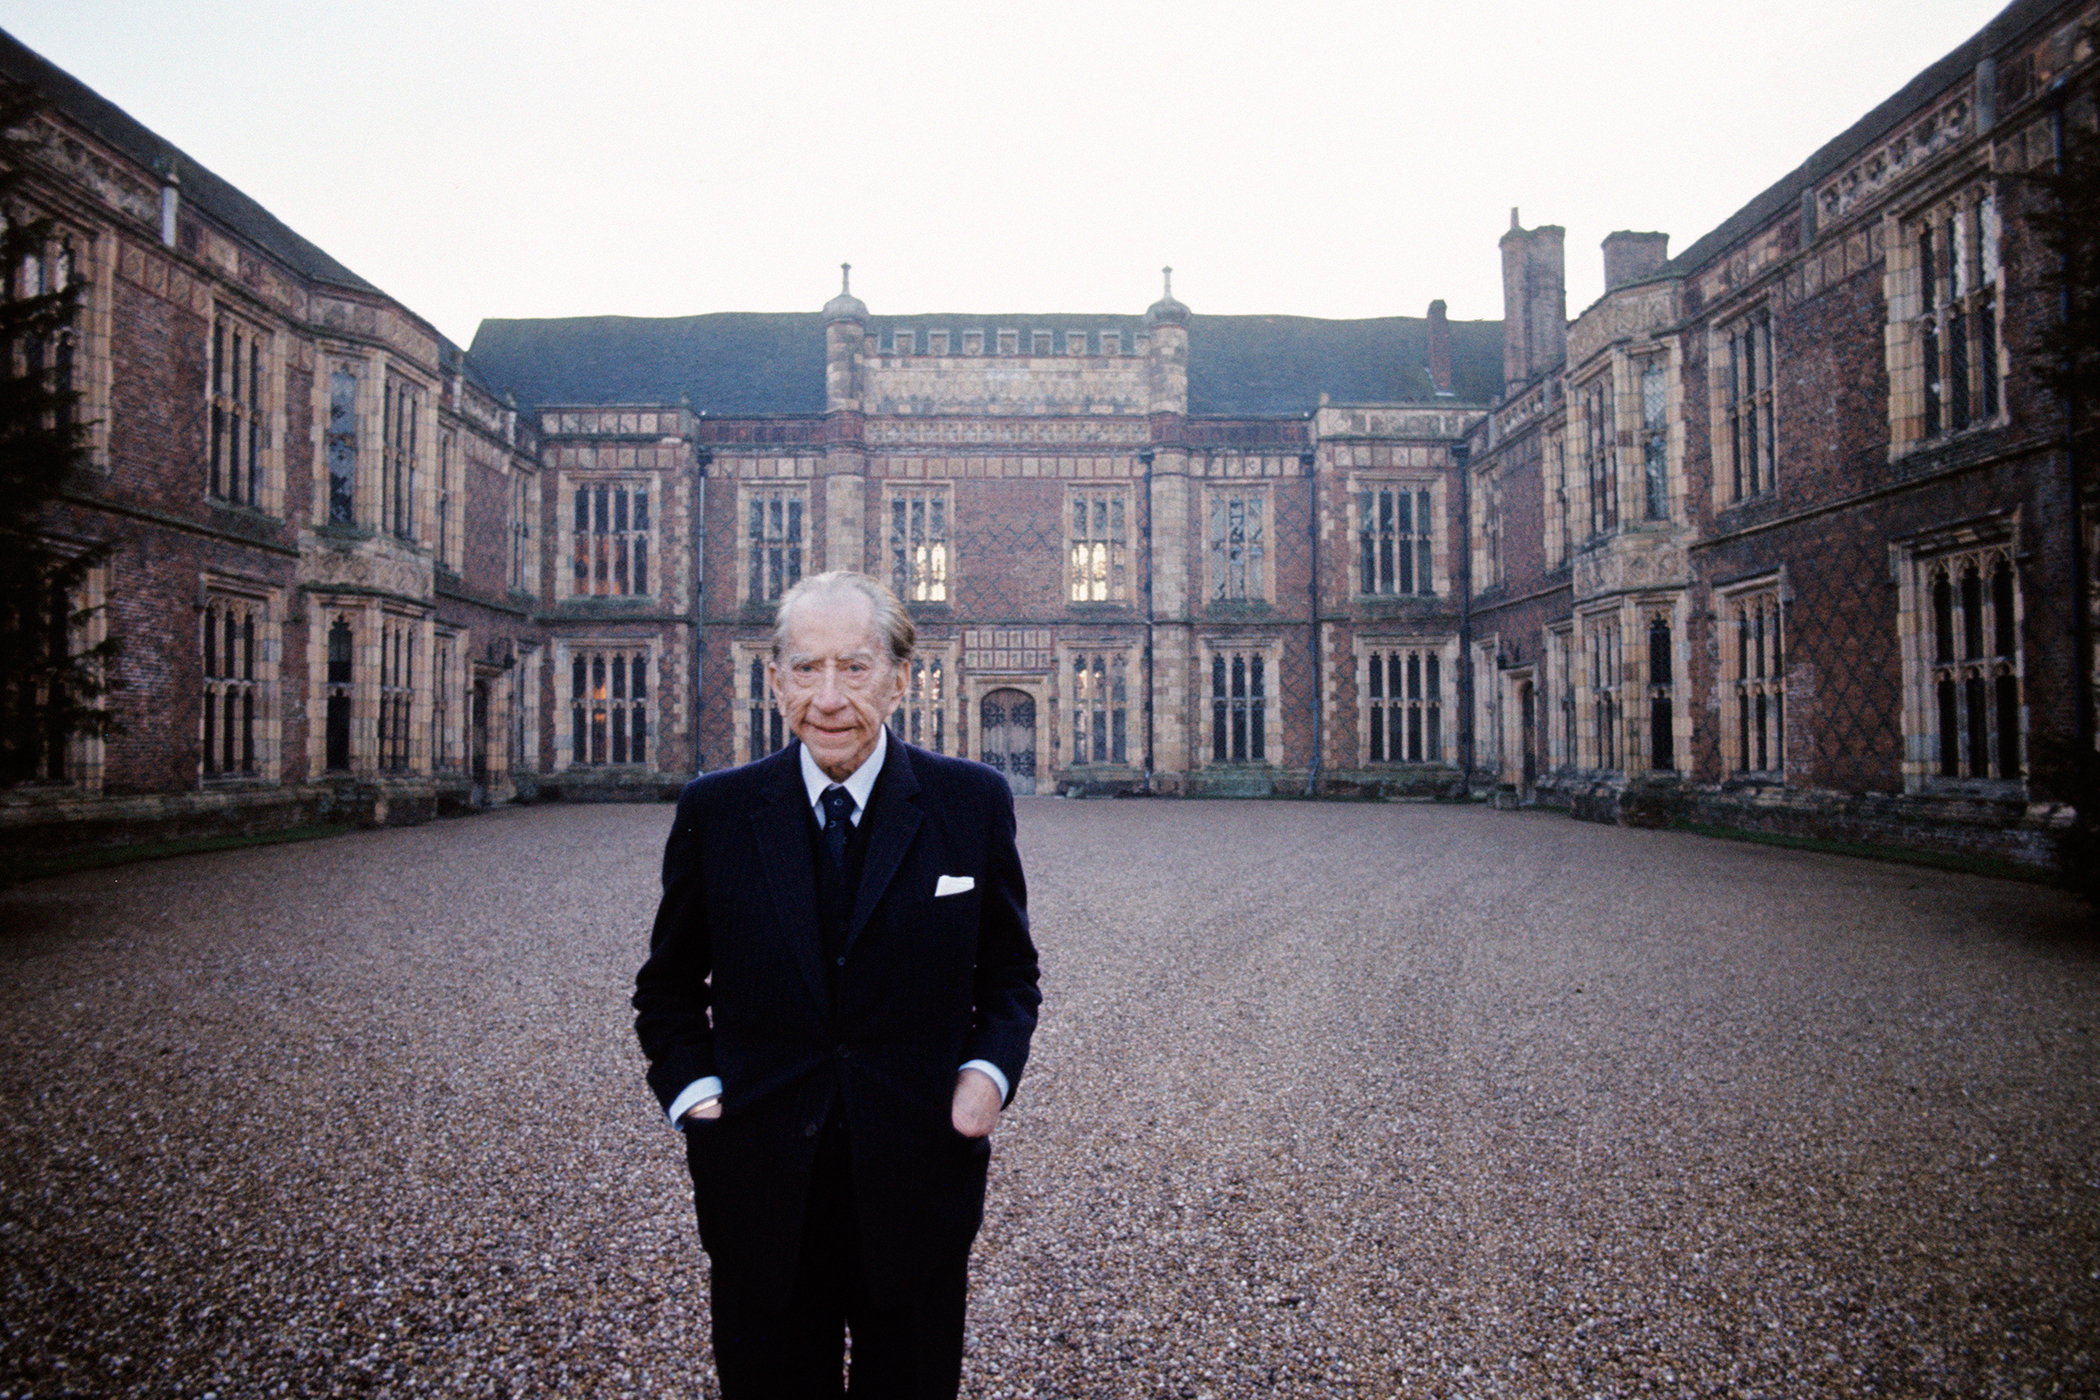 Anglo-American industrialist and billionaire Jean Paul Getty in his Sutton Place manor house, 3 miles from Guildford, in Surrey, England, January 1973.